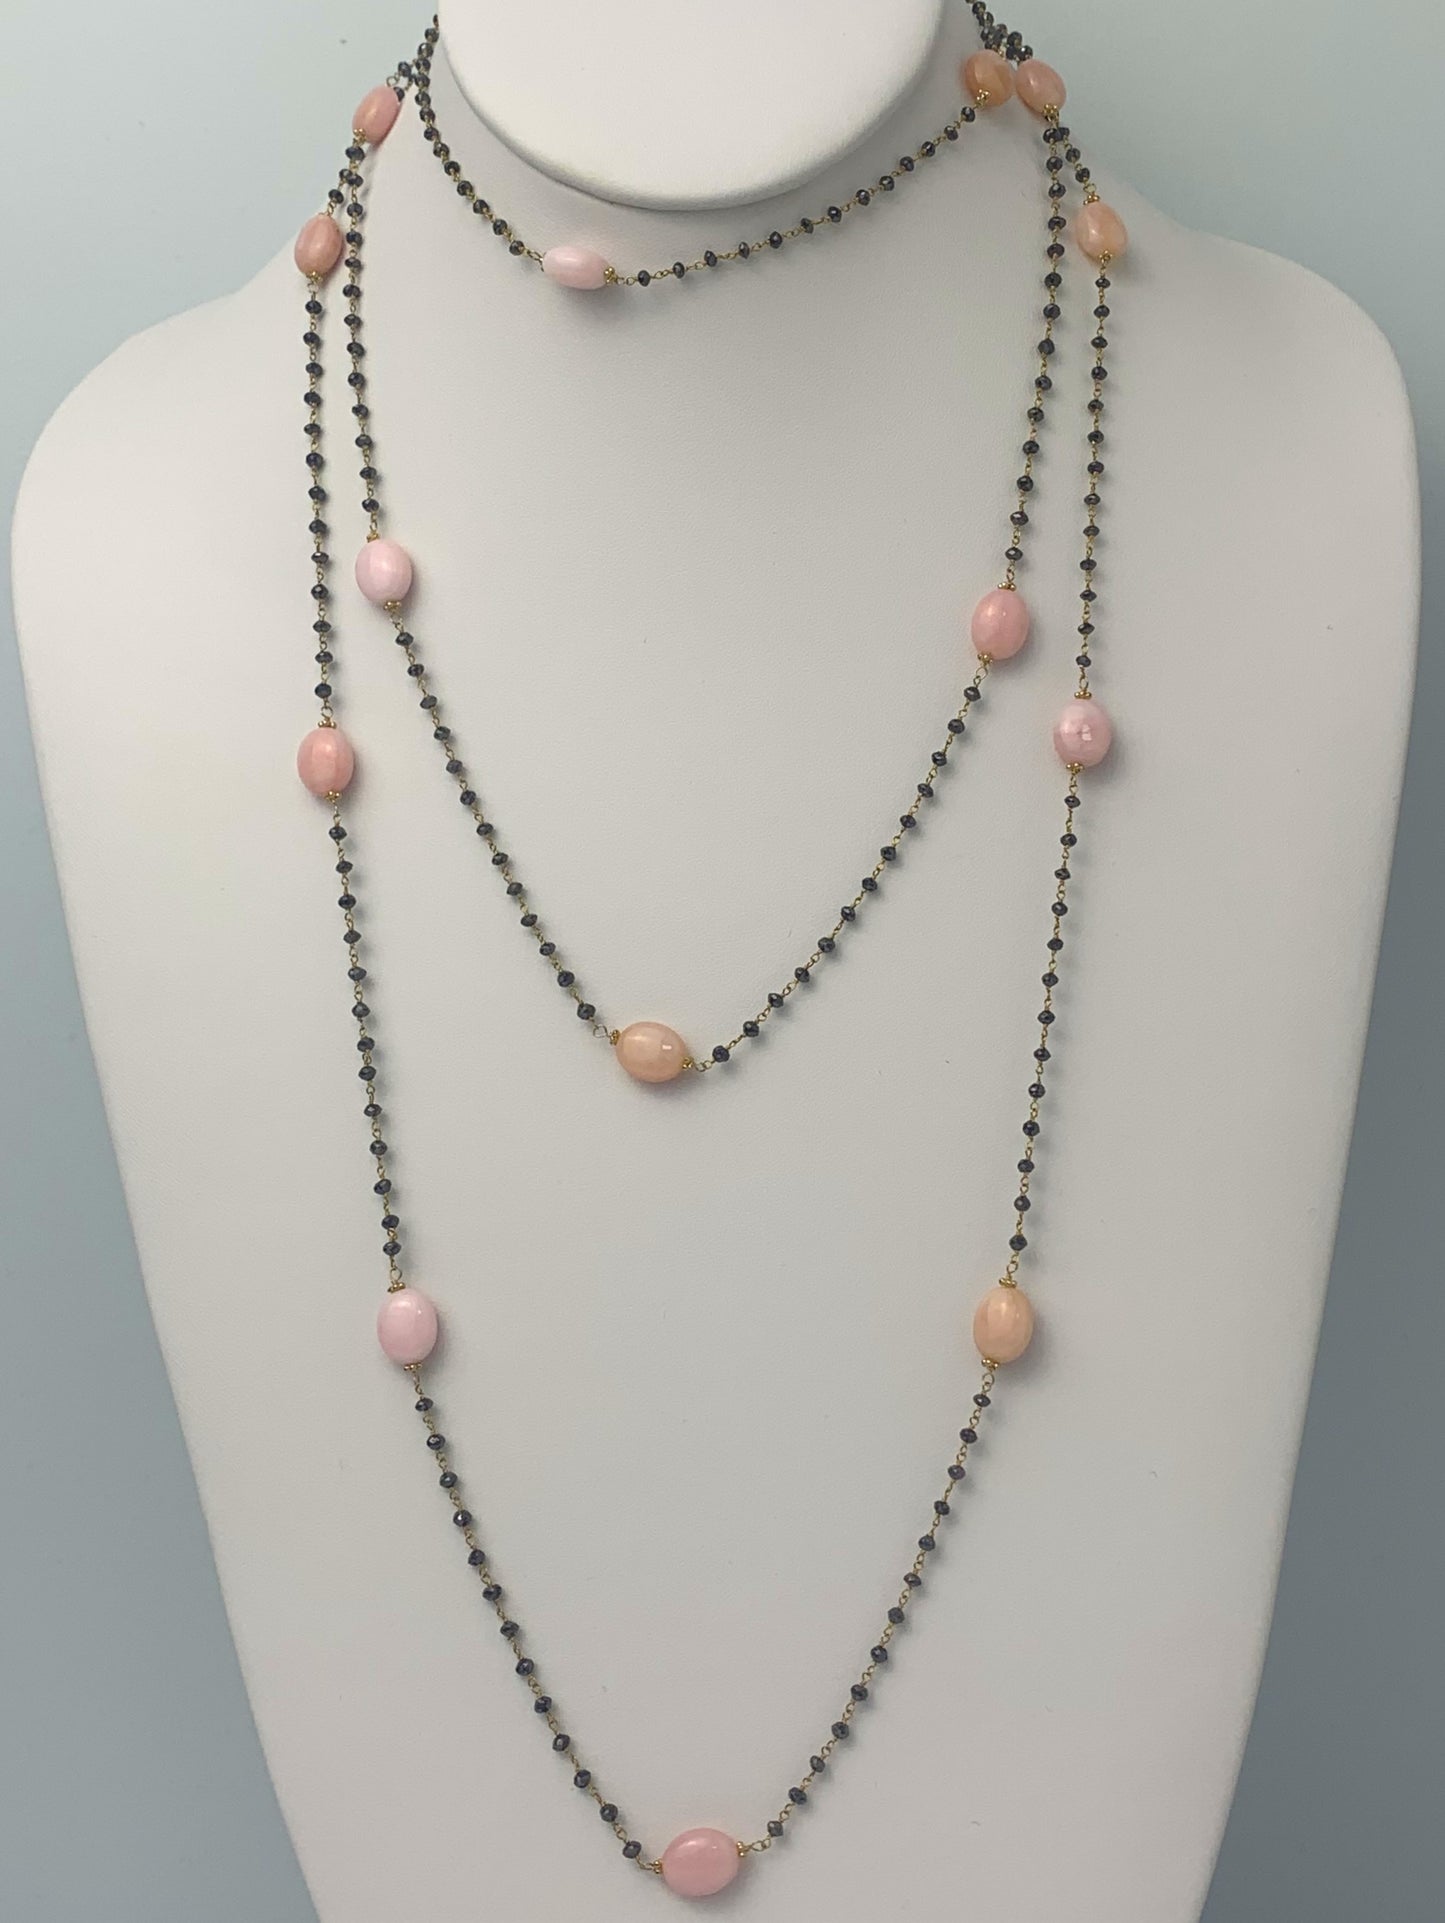 57" Pink Opal and Black Diamond 16 Station Rosary Necklace in 14KY - NCK-071-ROSDIAGM14Y-BLKPKO-57 28.10ctw